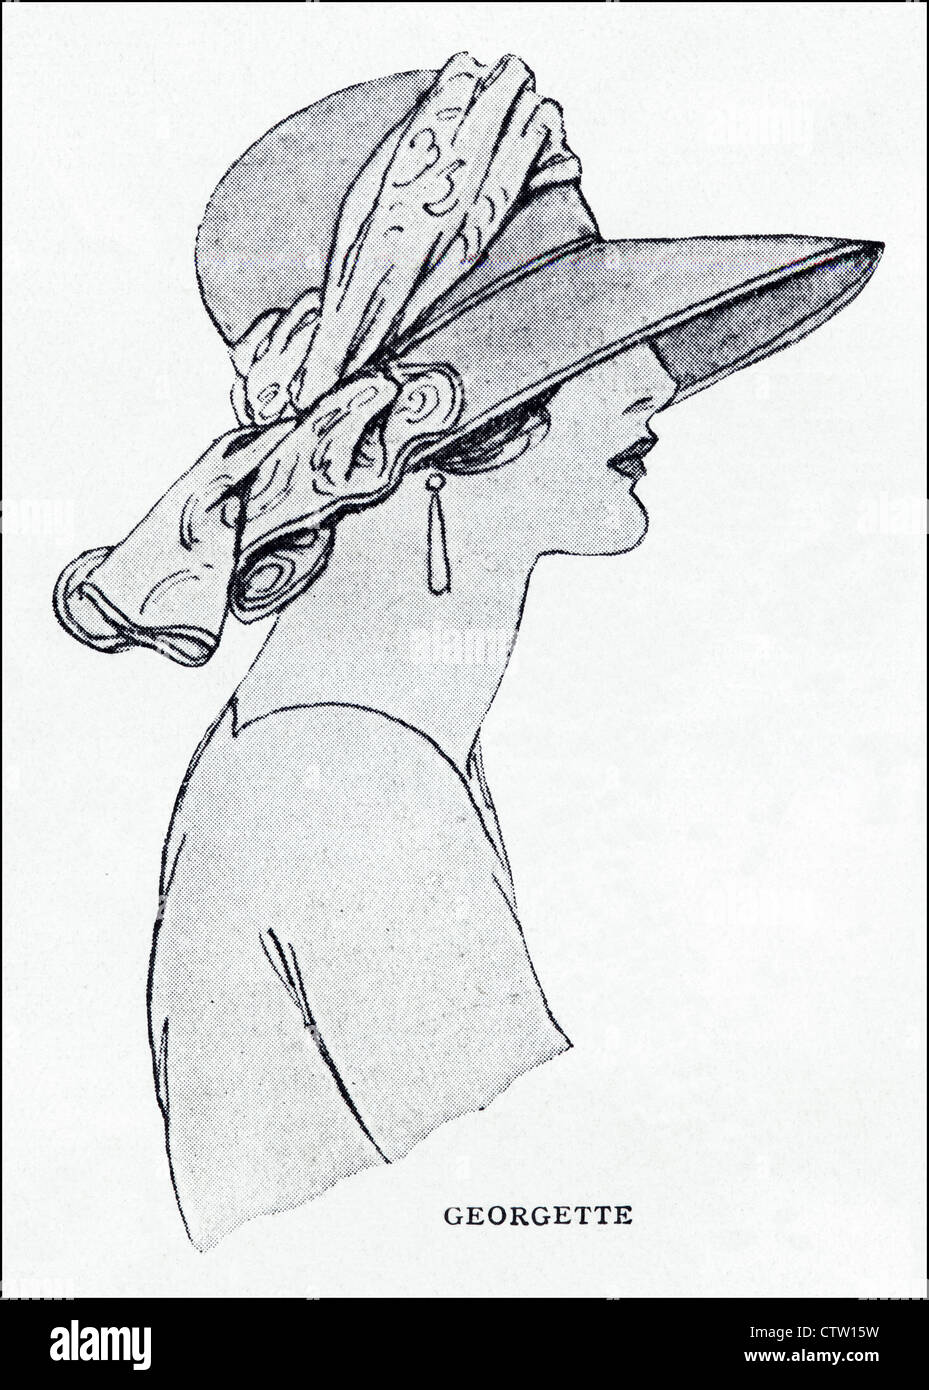 Illustration circa 1923. Paris fashions by designer GEORGETTE yellow bangkok summer hat trimmed with a scarf in ochre, green, red & blue Stock Photo